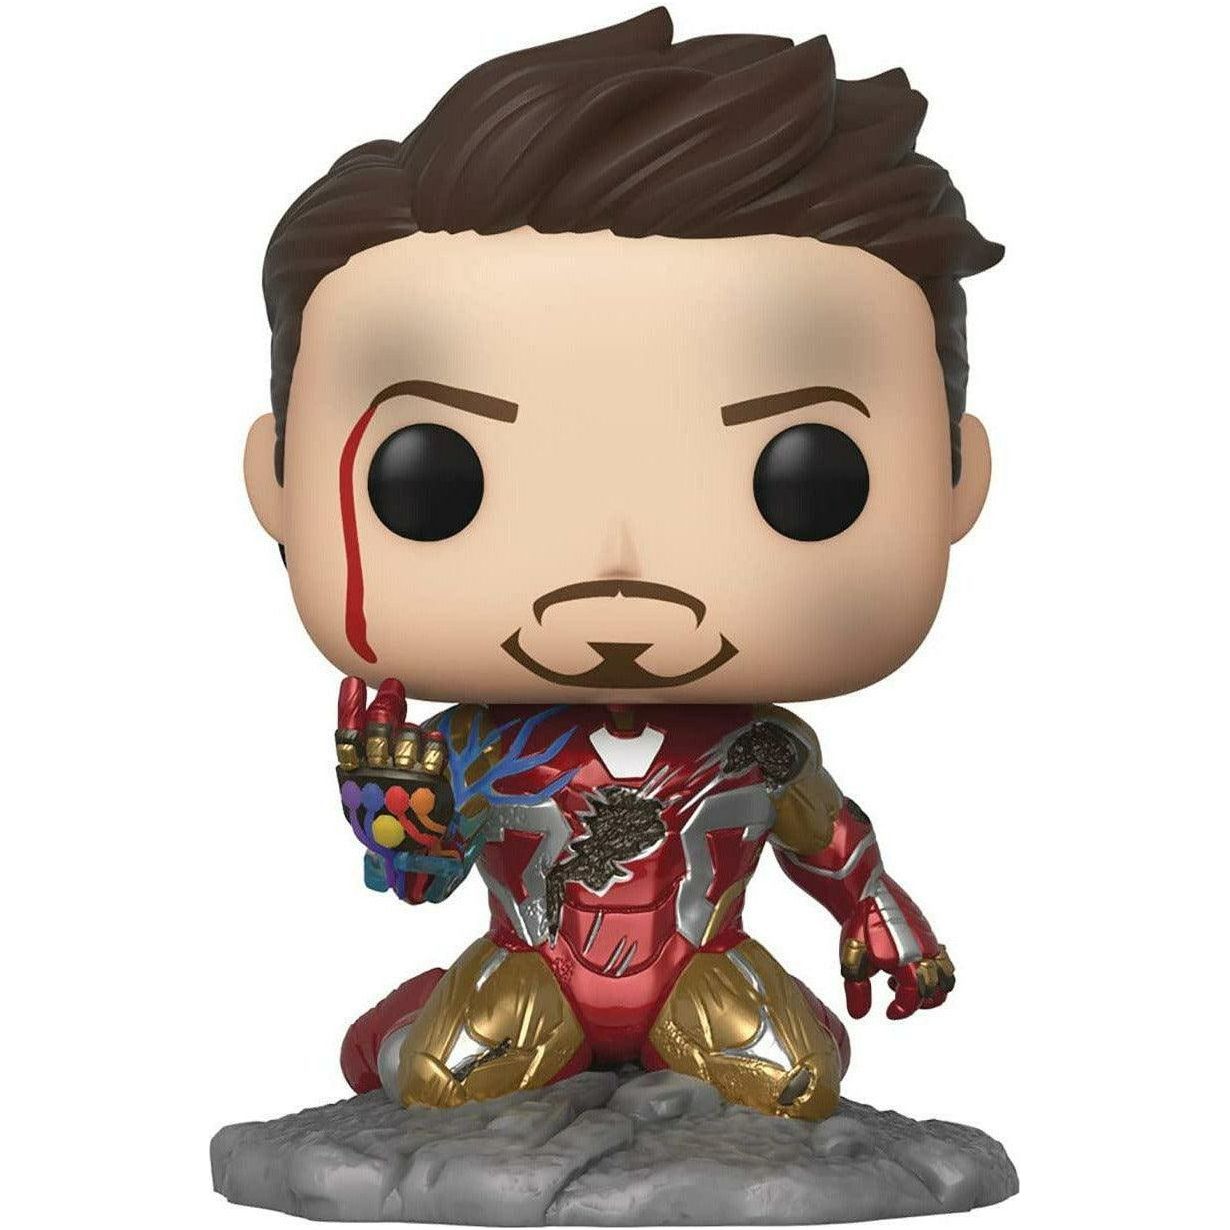 Funko Pop! Avengers Endgame: I Am Iron Man Glow-in-The-Dark Deluxe Vinyl Figure - BumbleToys - 18+, 4+ Years, 5-7 Years, Action Figures, Avengers, Boys, Characters, Funko, Iron man, Pre-Order